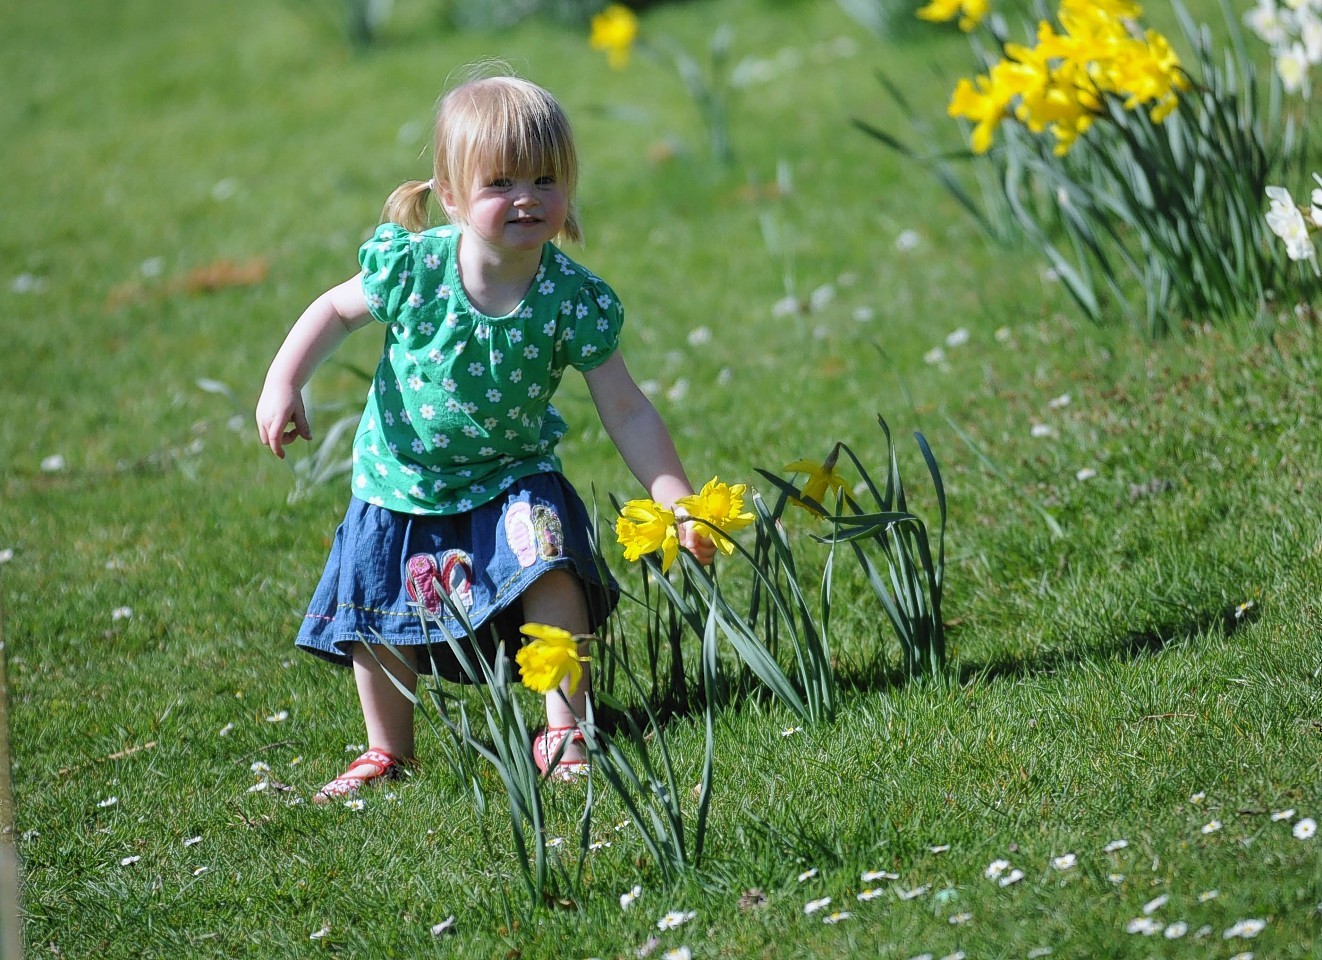 Little Charlotte Robertson, aged 2 years-old enjoying the weather in 2012 